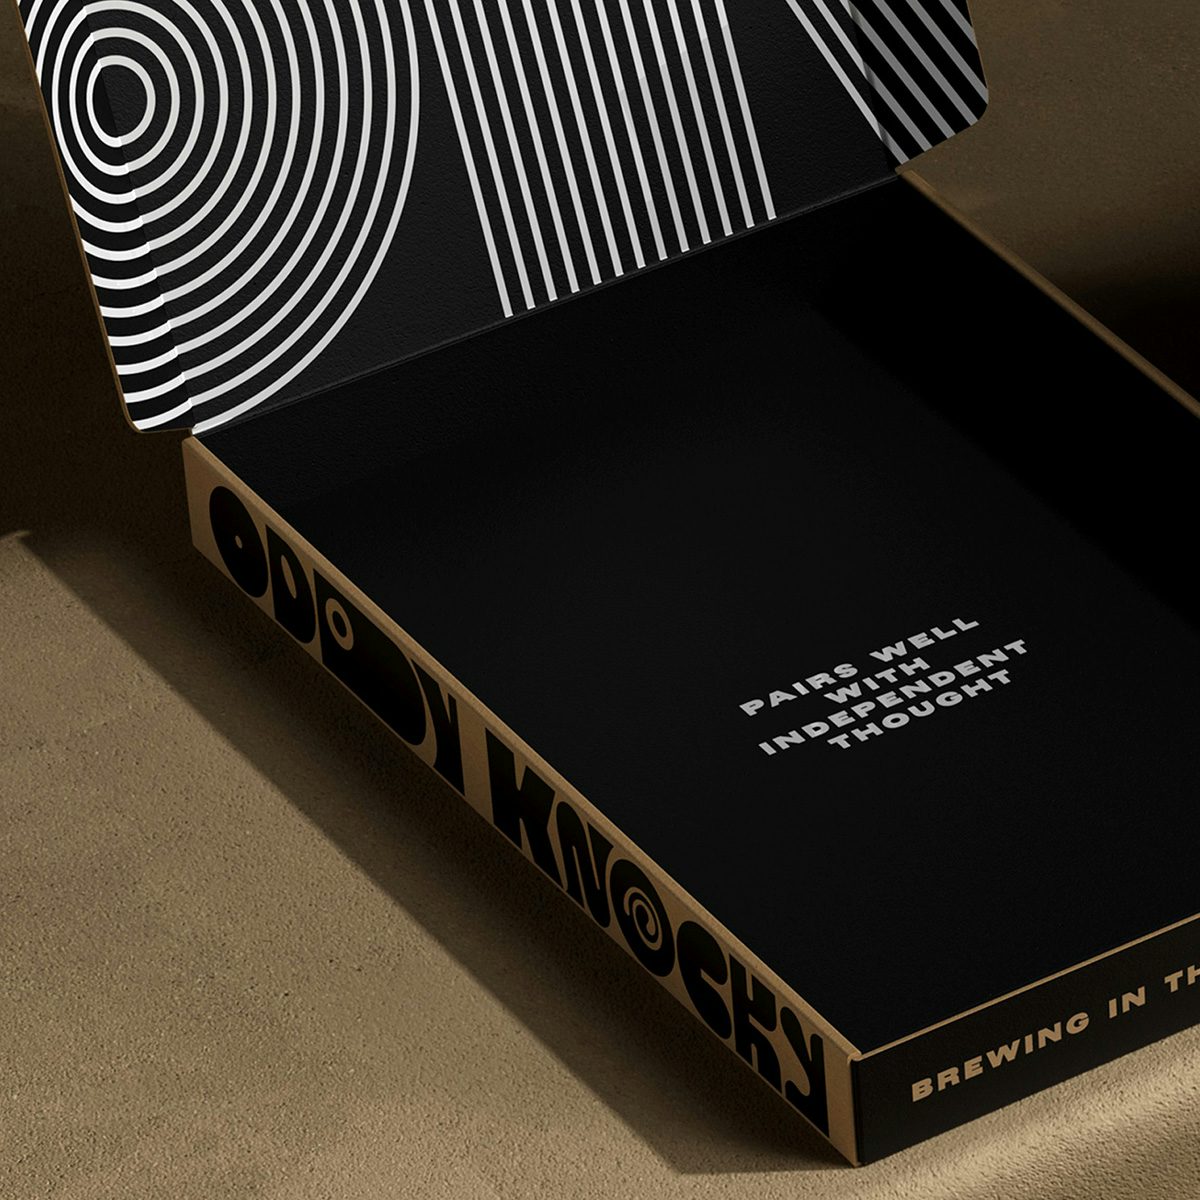 Photo showing the branding for Oddy Knocky on a box inscribed with the words 'Pairs well with independent thought' on a black background